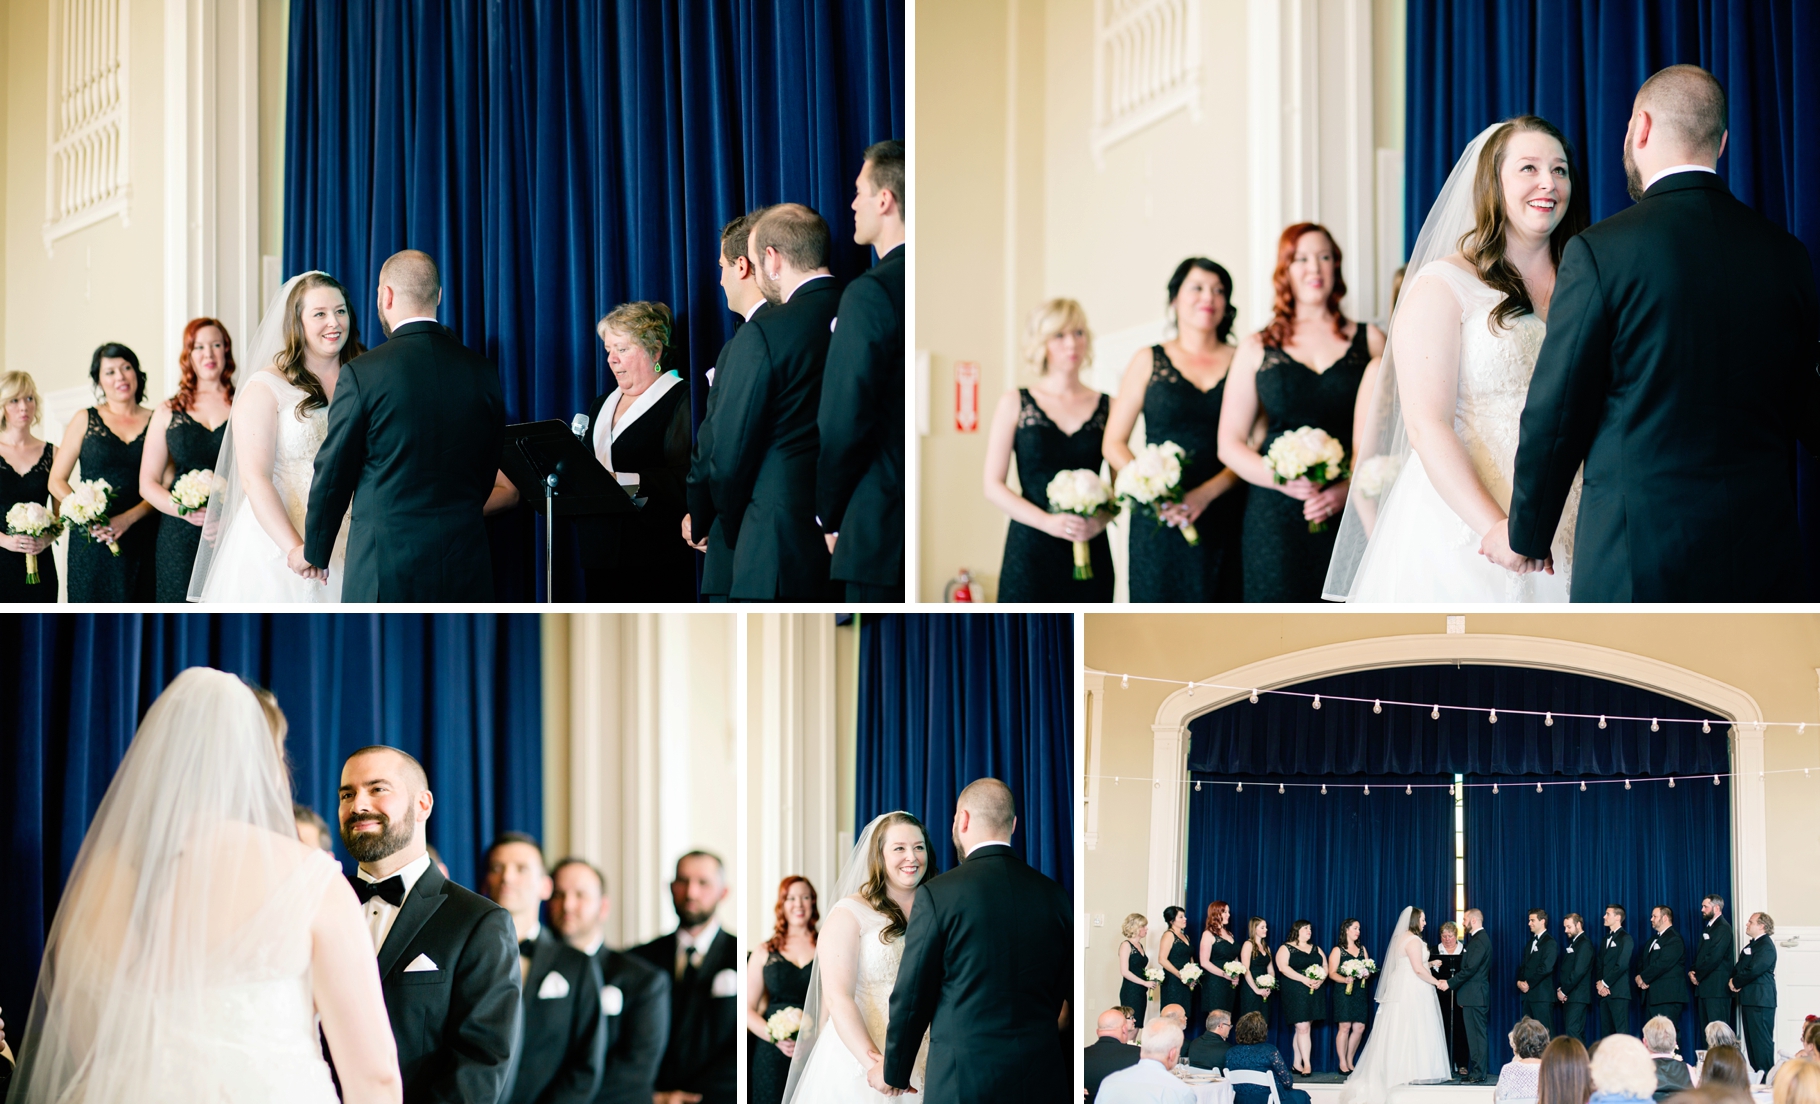 44-Bride-Groom-Ceremony-Photos-Great-Hall-Green-Lake-Seattle-Wedding-Photographer-Photography-by-Betty-Elaine